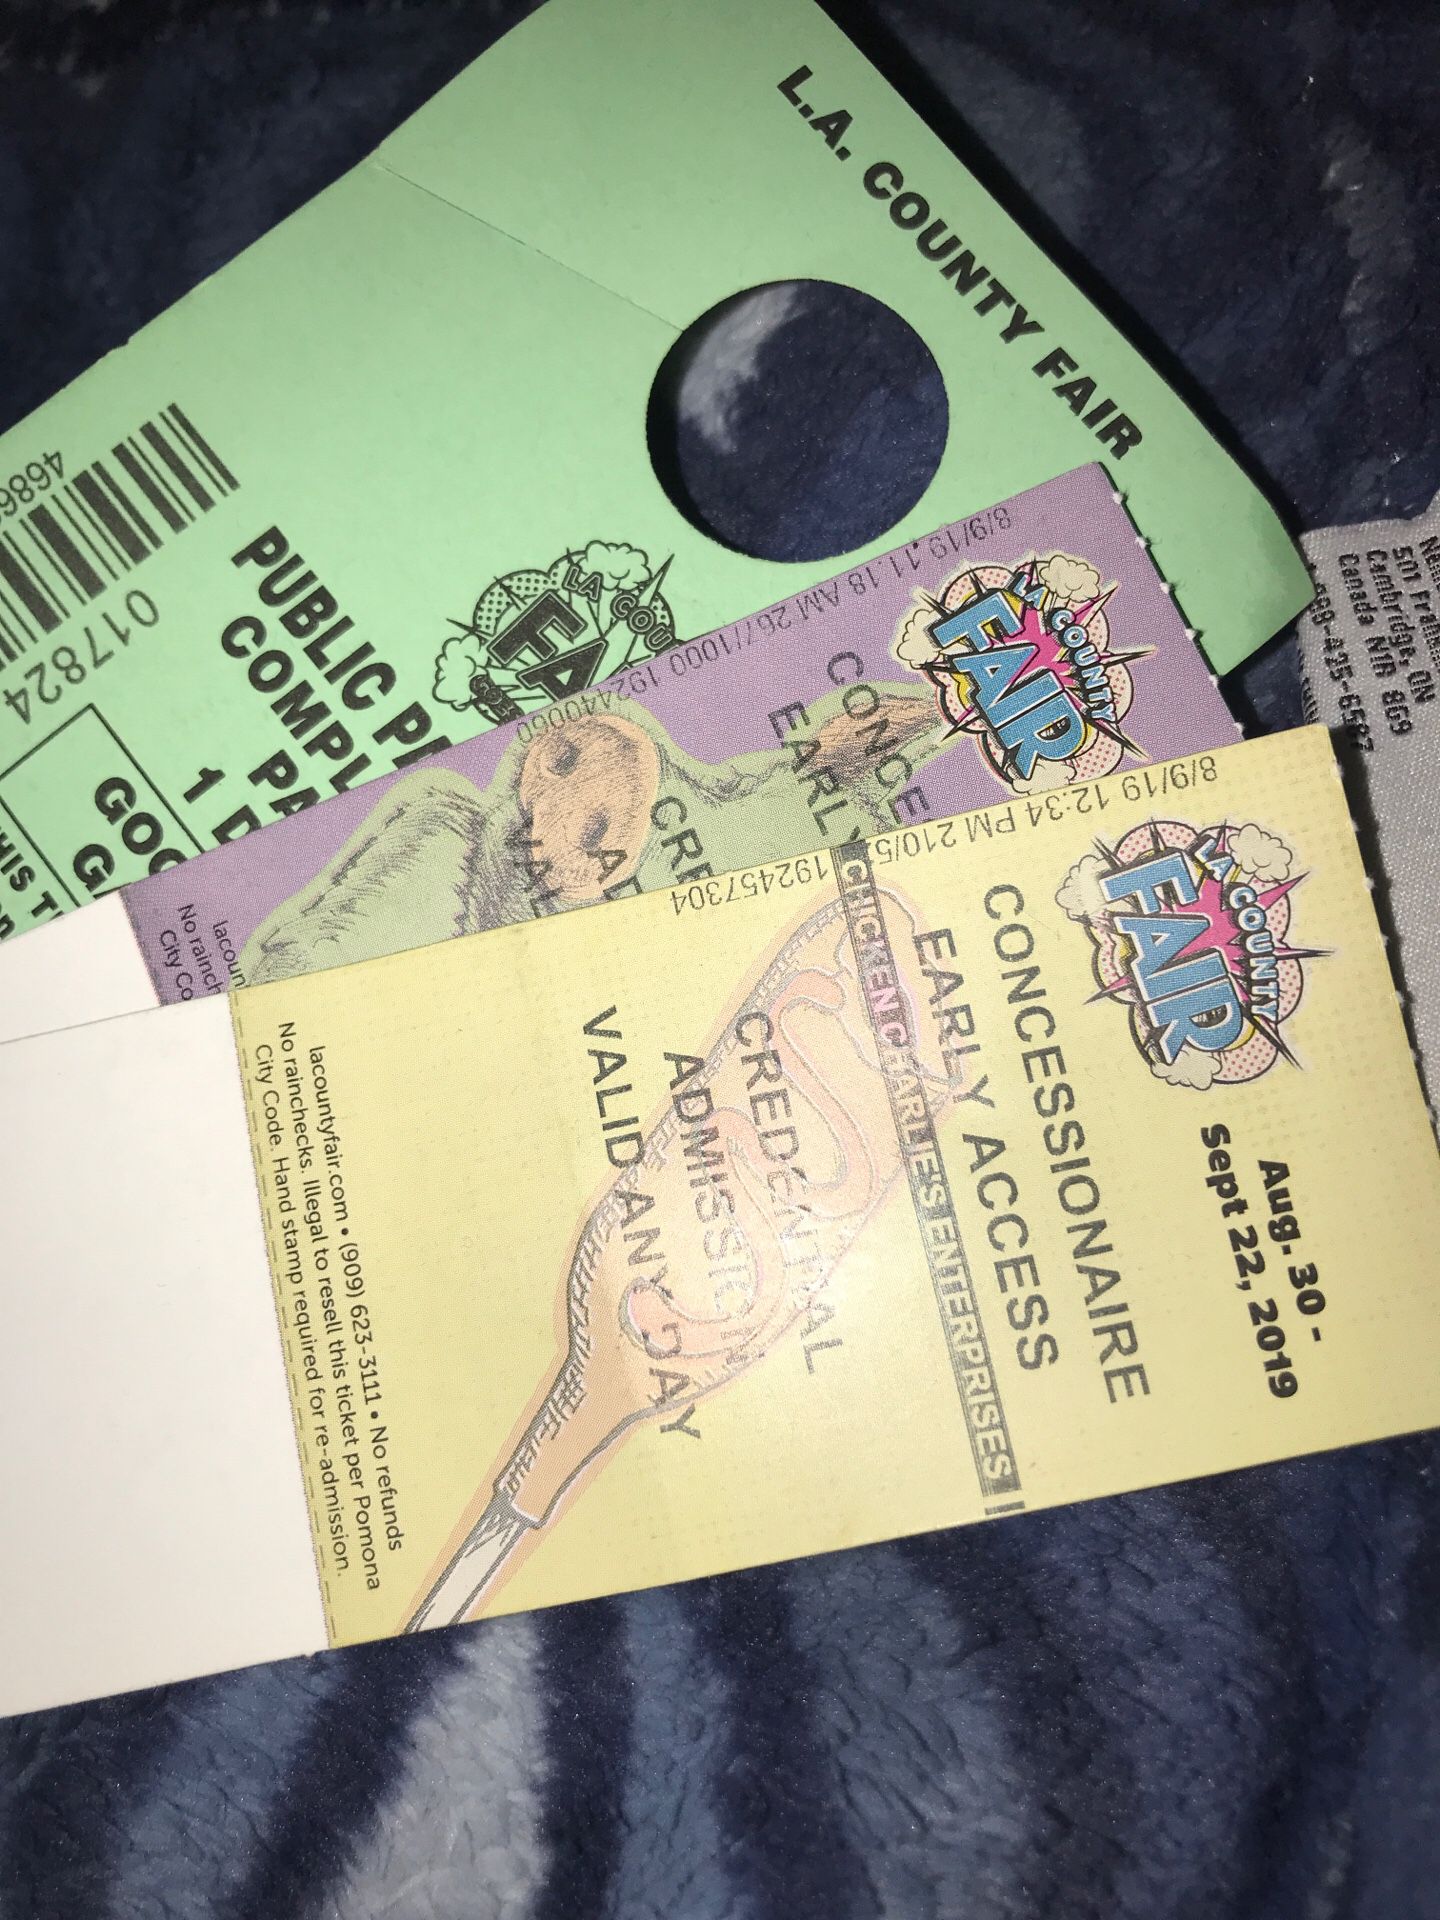 La county fair tickets and parking pass